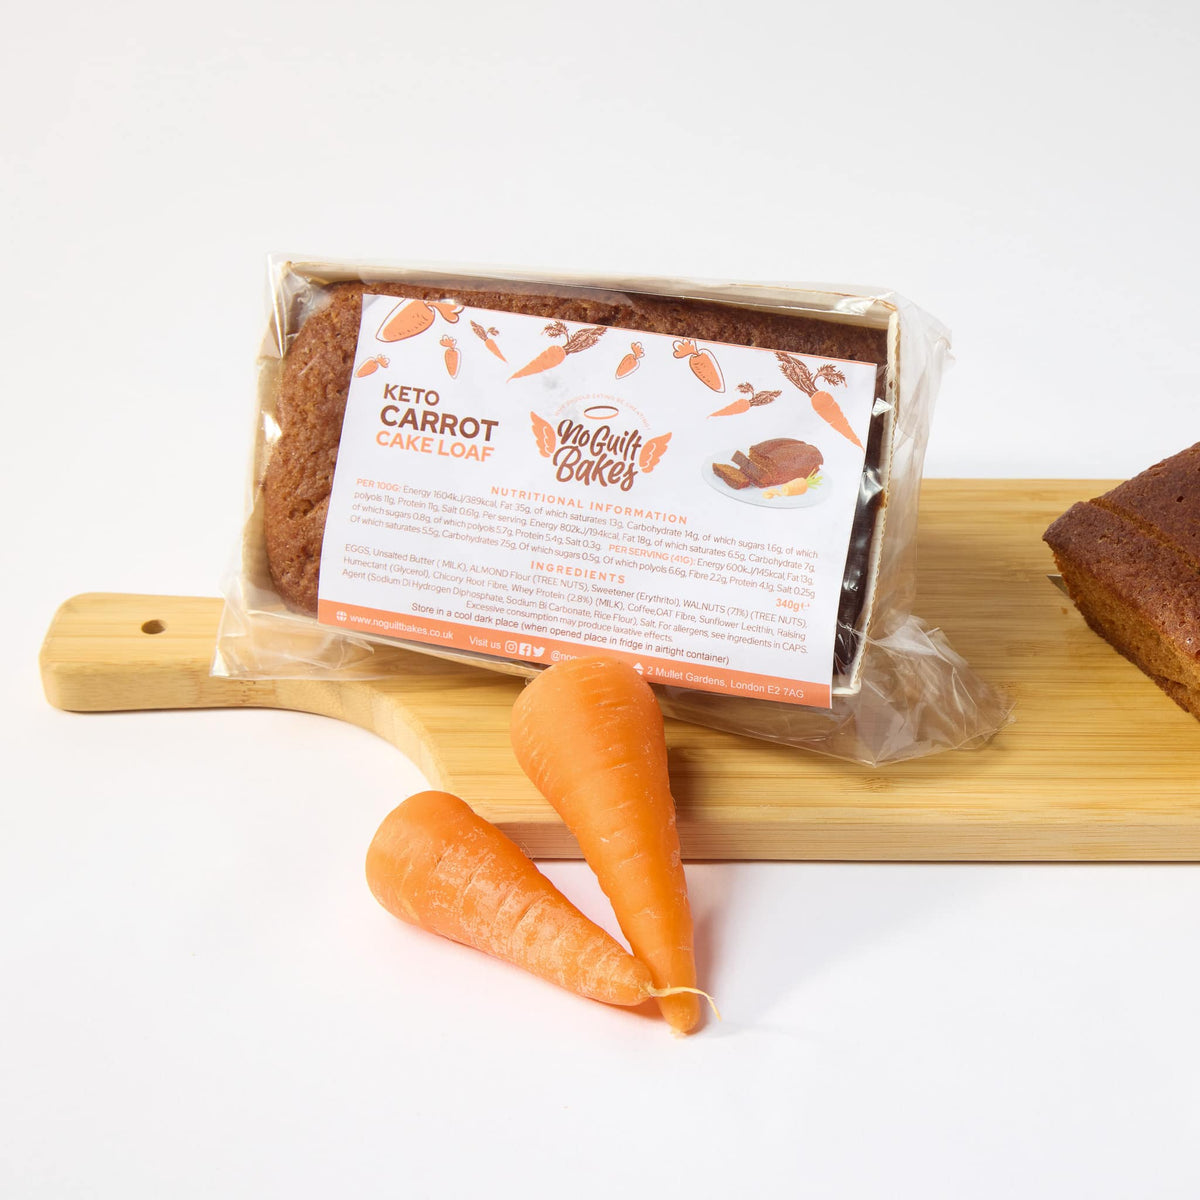 A package of low-carb, keto-friendly Carrot Keto Cake Loaf and fresh carrots on a cutting board by No Guilt Bakes.